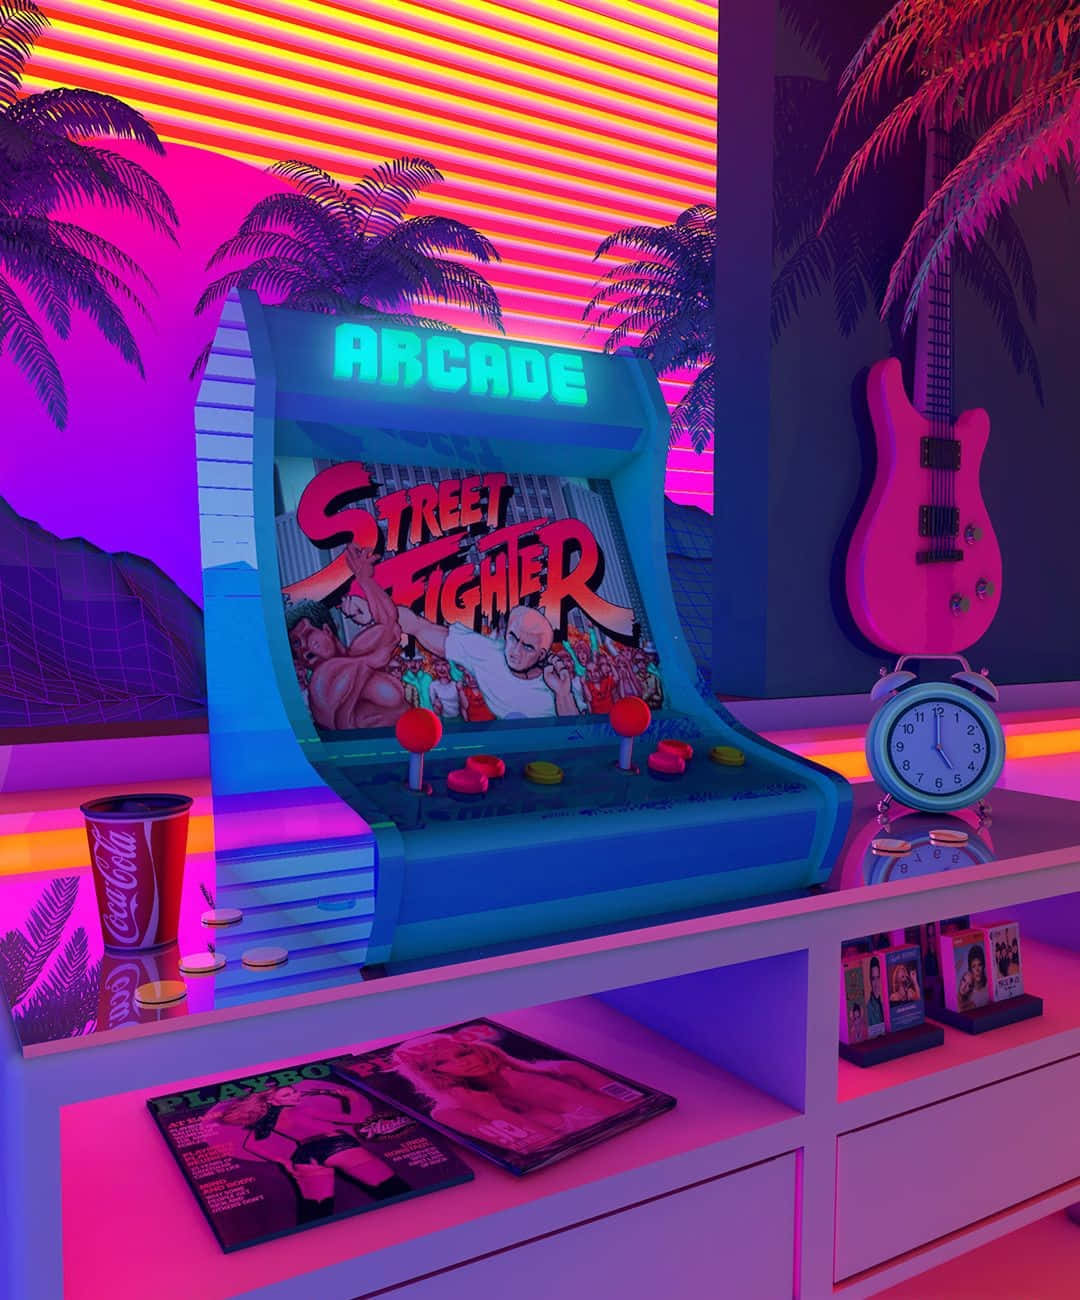 Download A Neon Lit Room With A Street Fighter Game Console Wallpaper ...